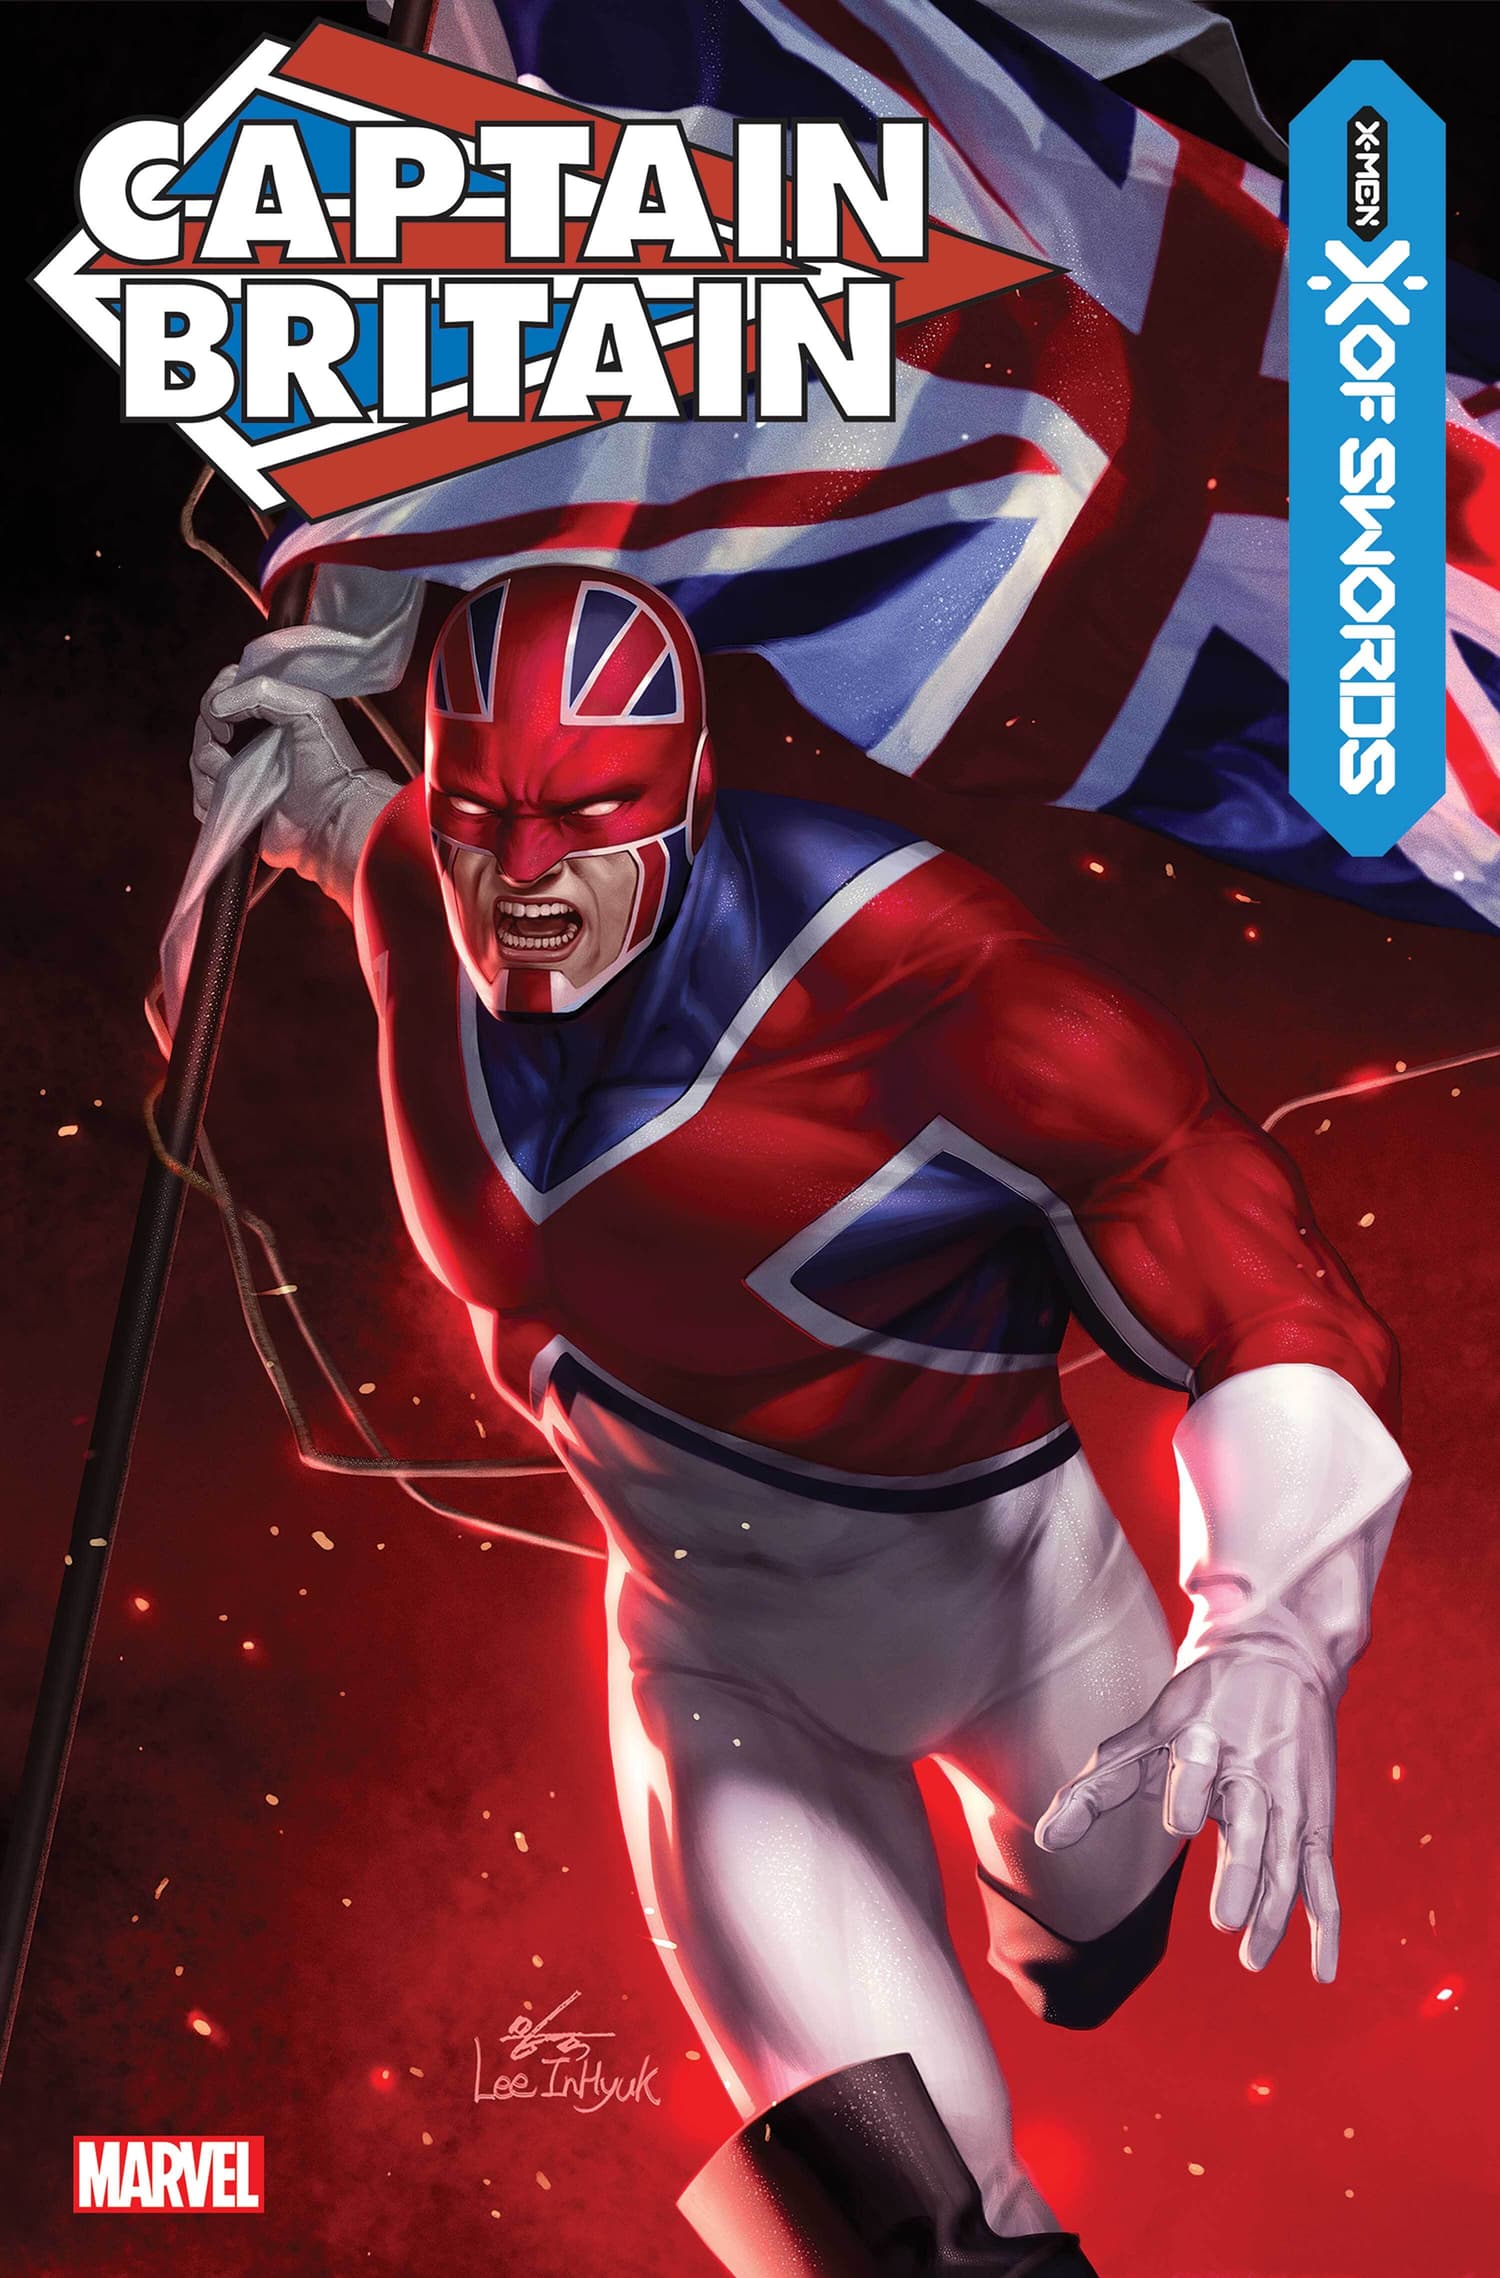 CAPTAIN BRITAIN: MARVEL TALES #1 WRITTEN BY CHRIS CLAREMONT; ART BY HERB TRIMPE, JOHN BYRNE & ALAN DAVIS; COVER BY INHYUK LEE